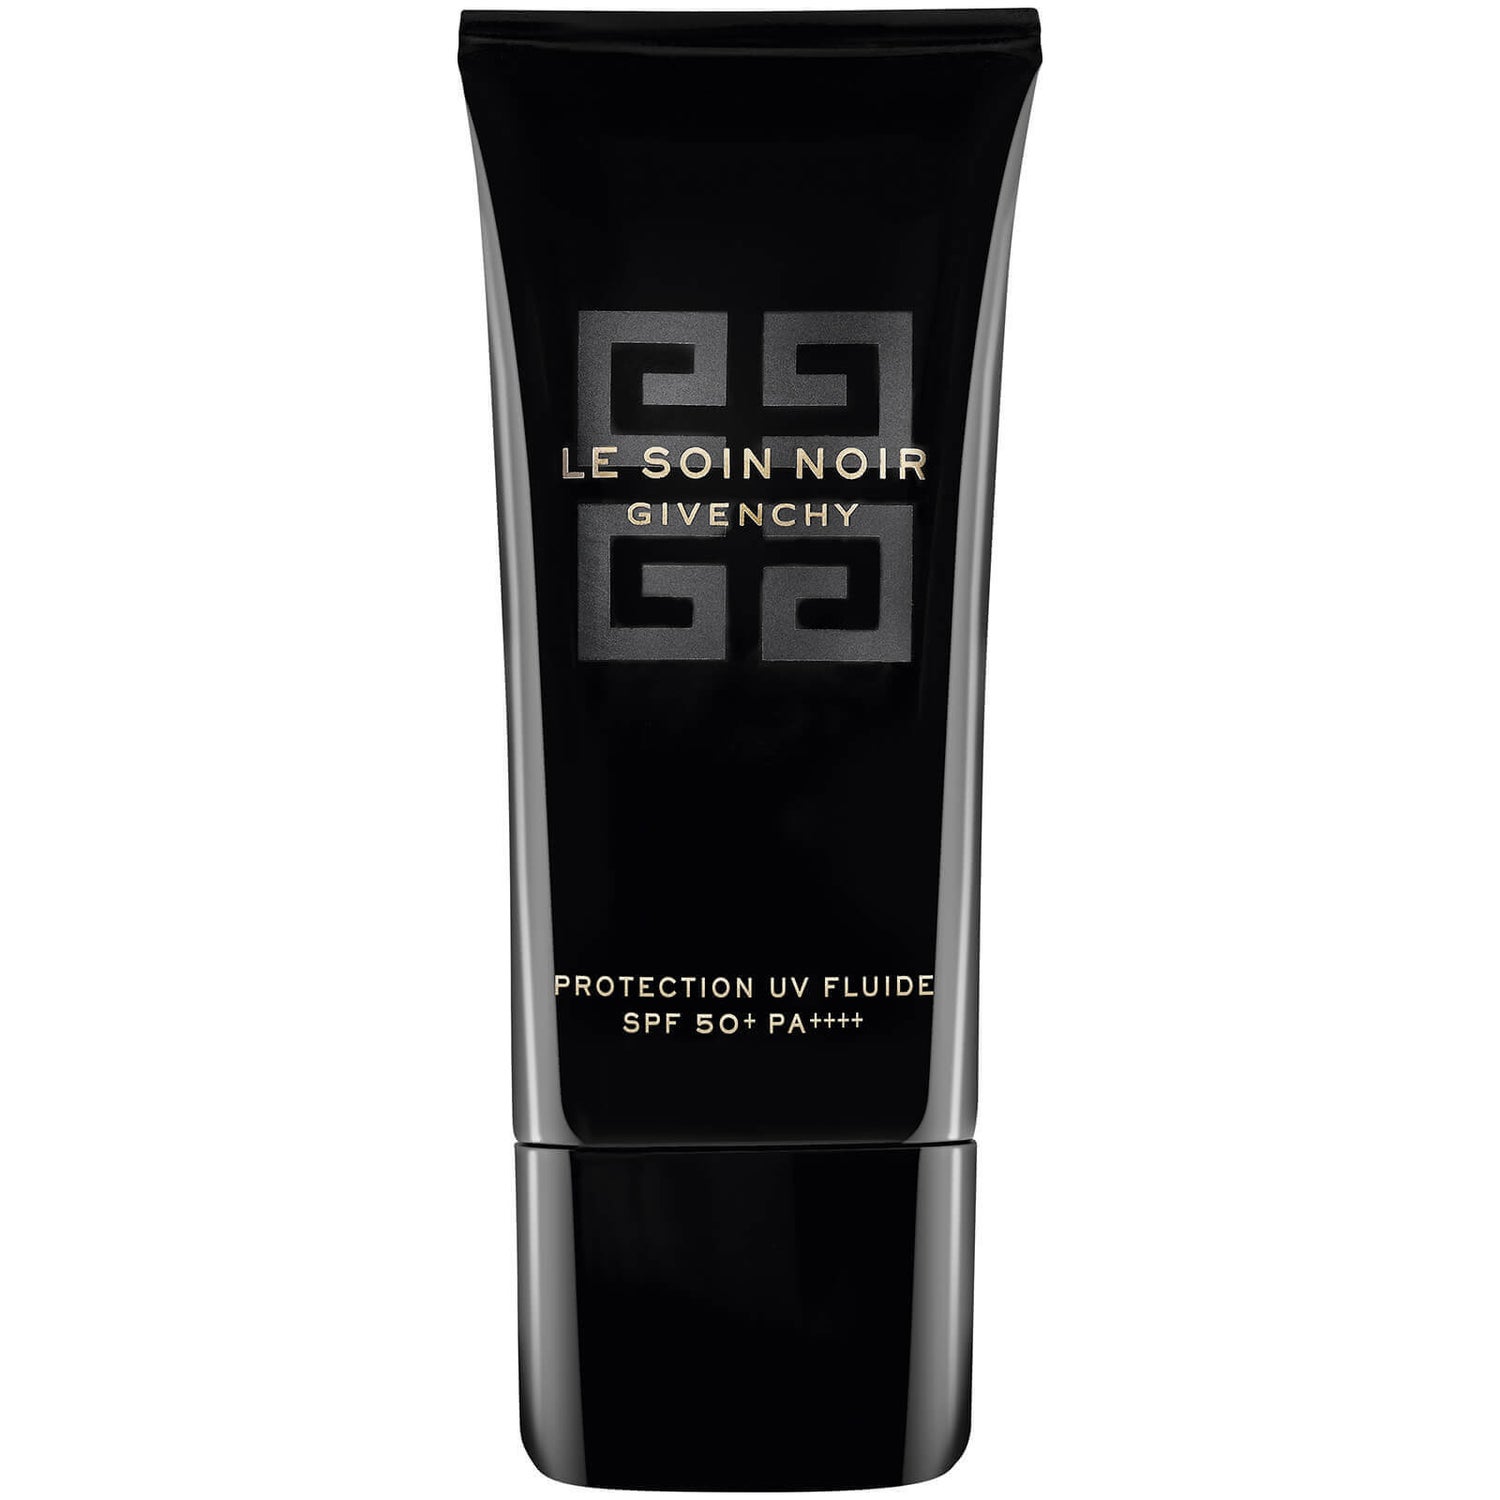 Givenchy Le Soin Noir Protection UV Fluide Protection SPF 50+ Pa++++ Day Cream 30ml